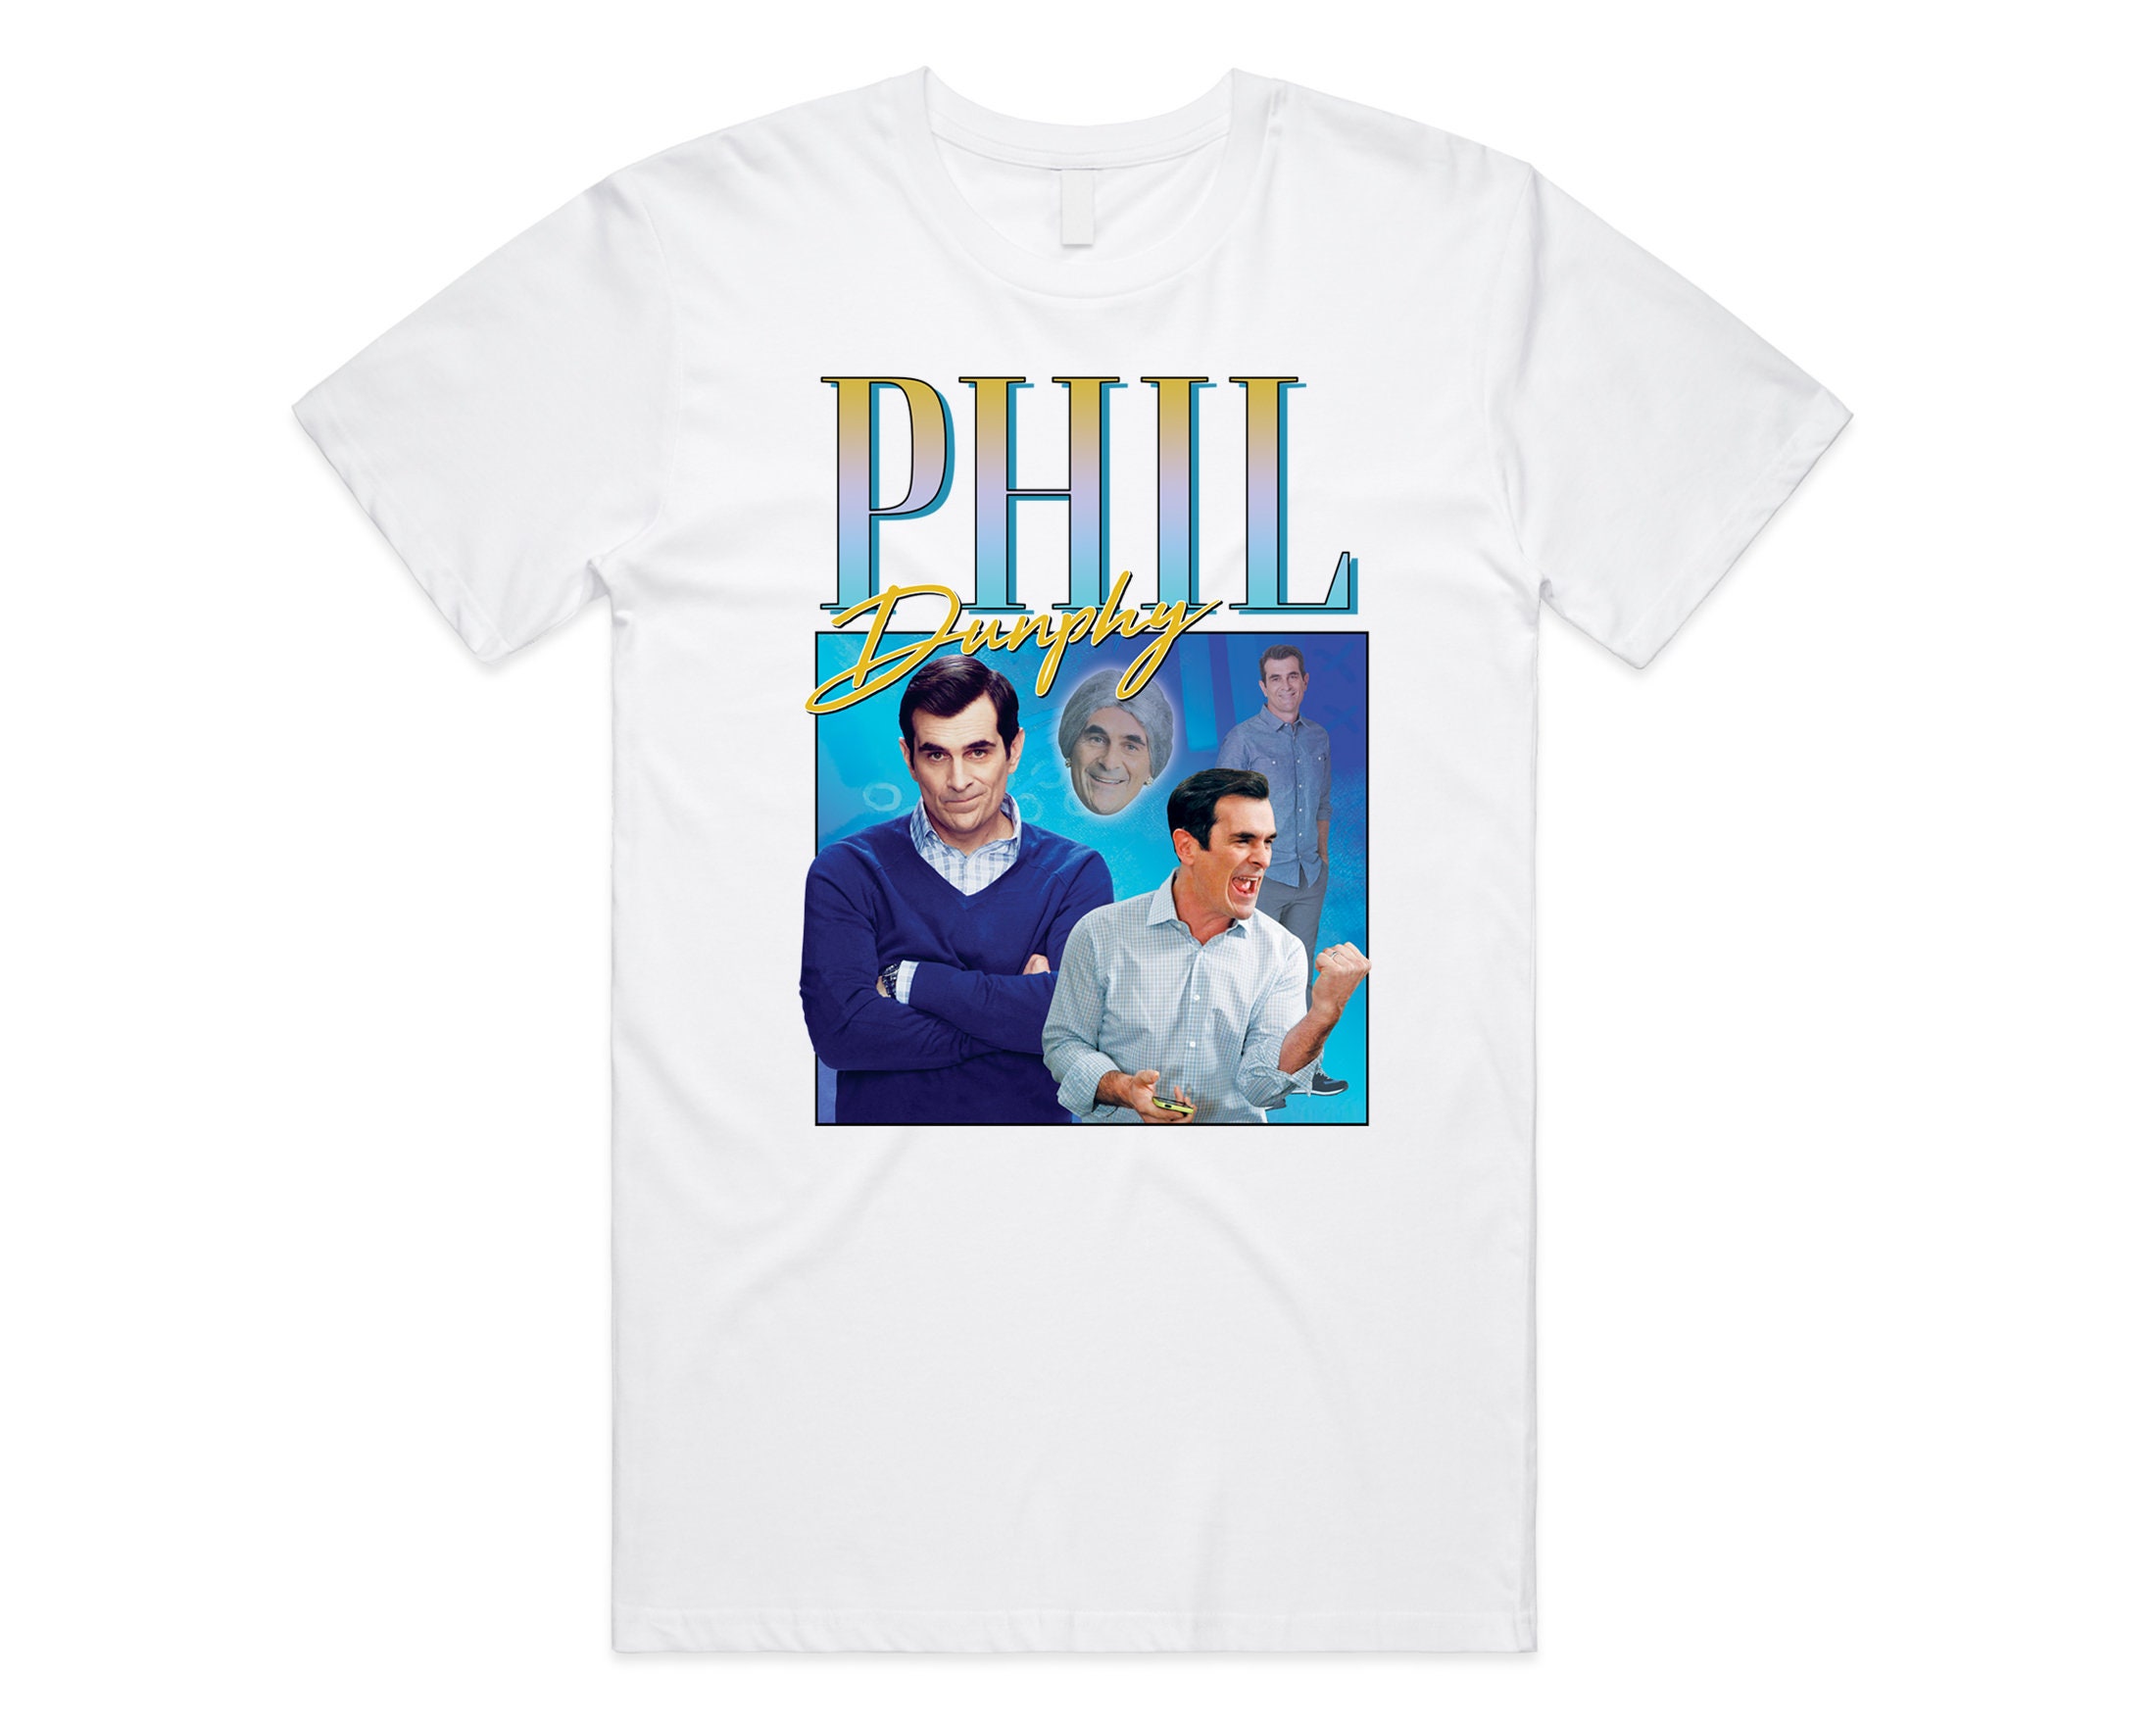 Phil Dunphy Homage T-Shirt Tee Top Tv Show Funny 90’s Retro Vintage